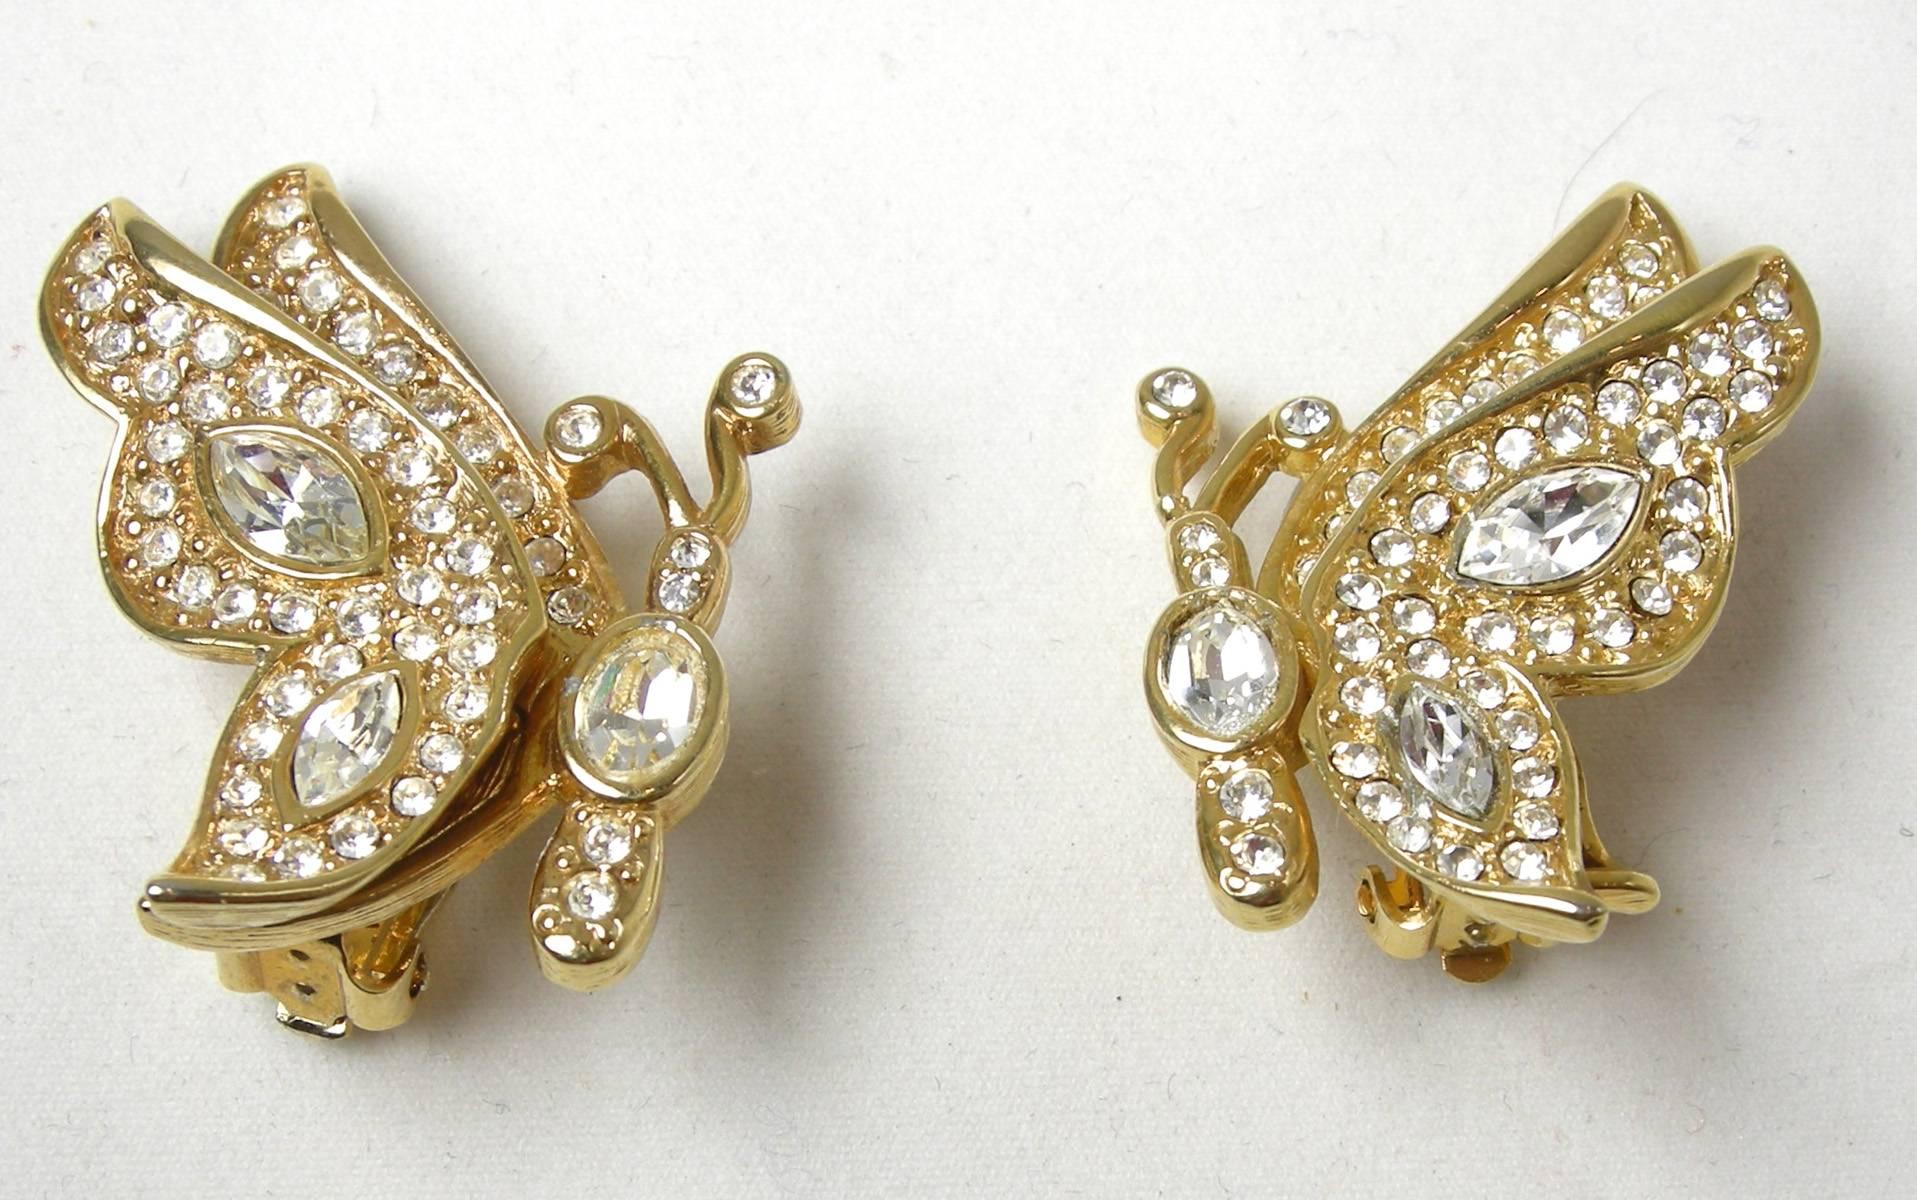 I love these clip earrings by Kenneth Jay Lane.  They are 3-dimensional butterflies in a gold tone metal setting and embedded with rhinestones throughout.  Larger tear shaped rhinestones accentuate the wings.  The body has an oval rhinestone along